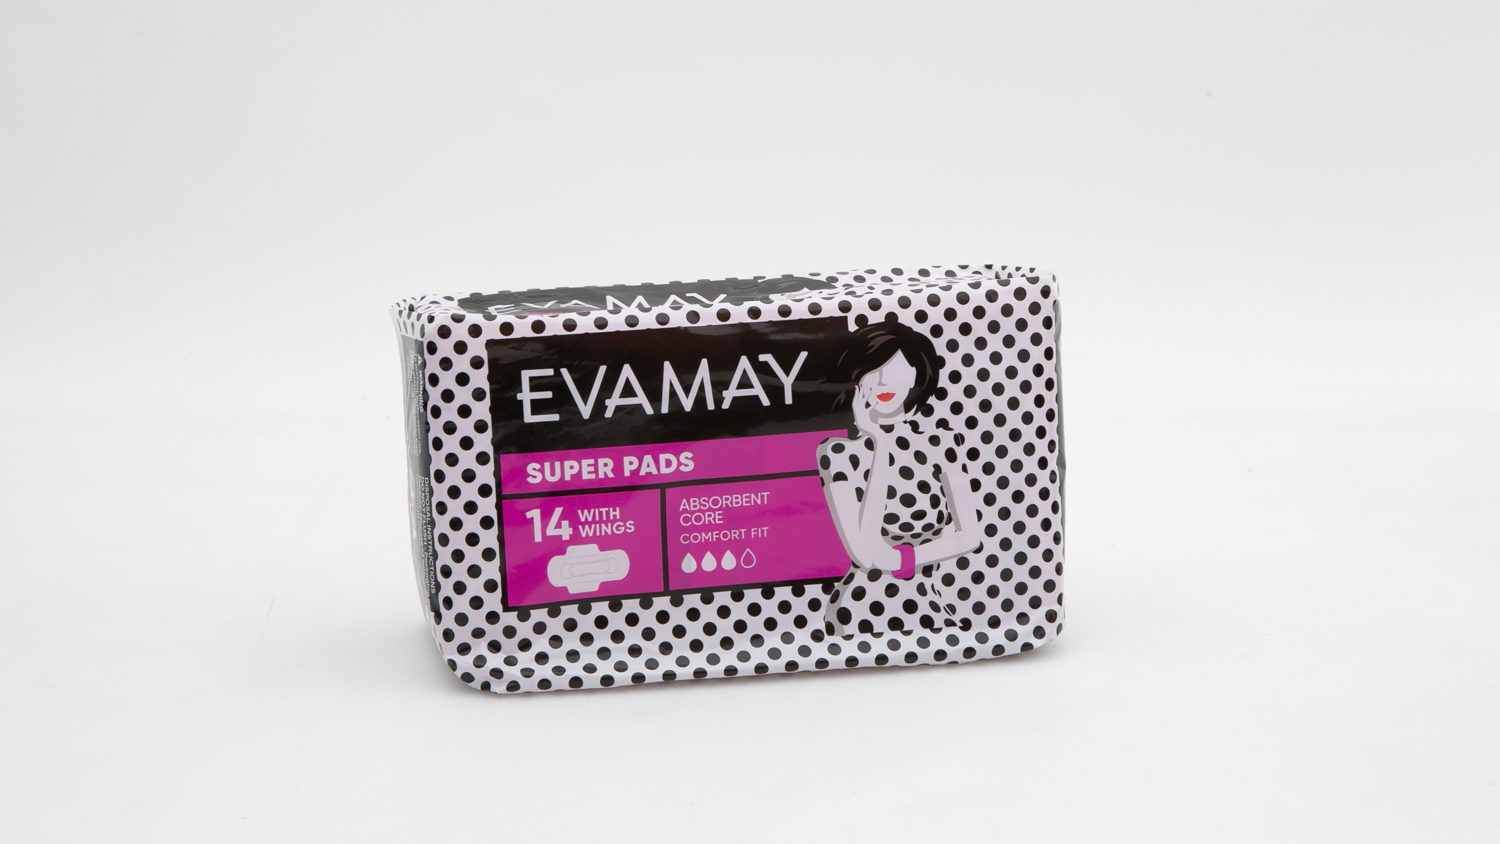 Woolworths Evamay Super Pads with wings carousel image